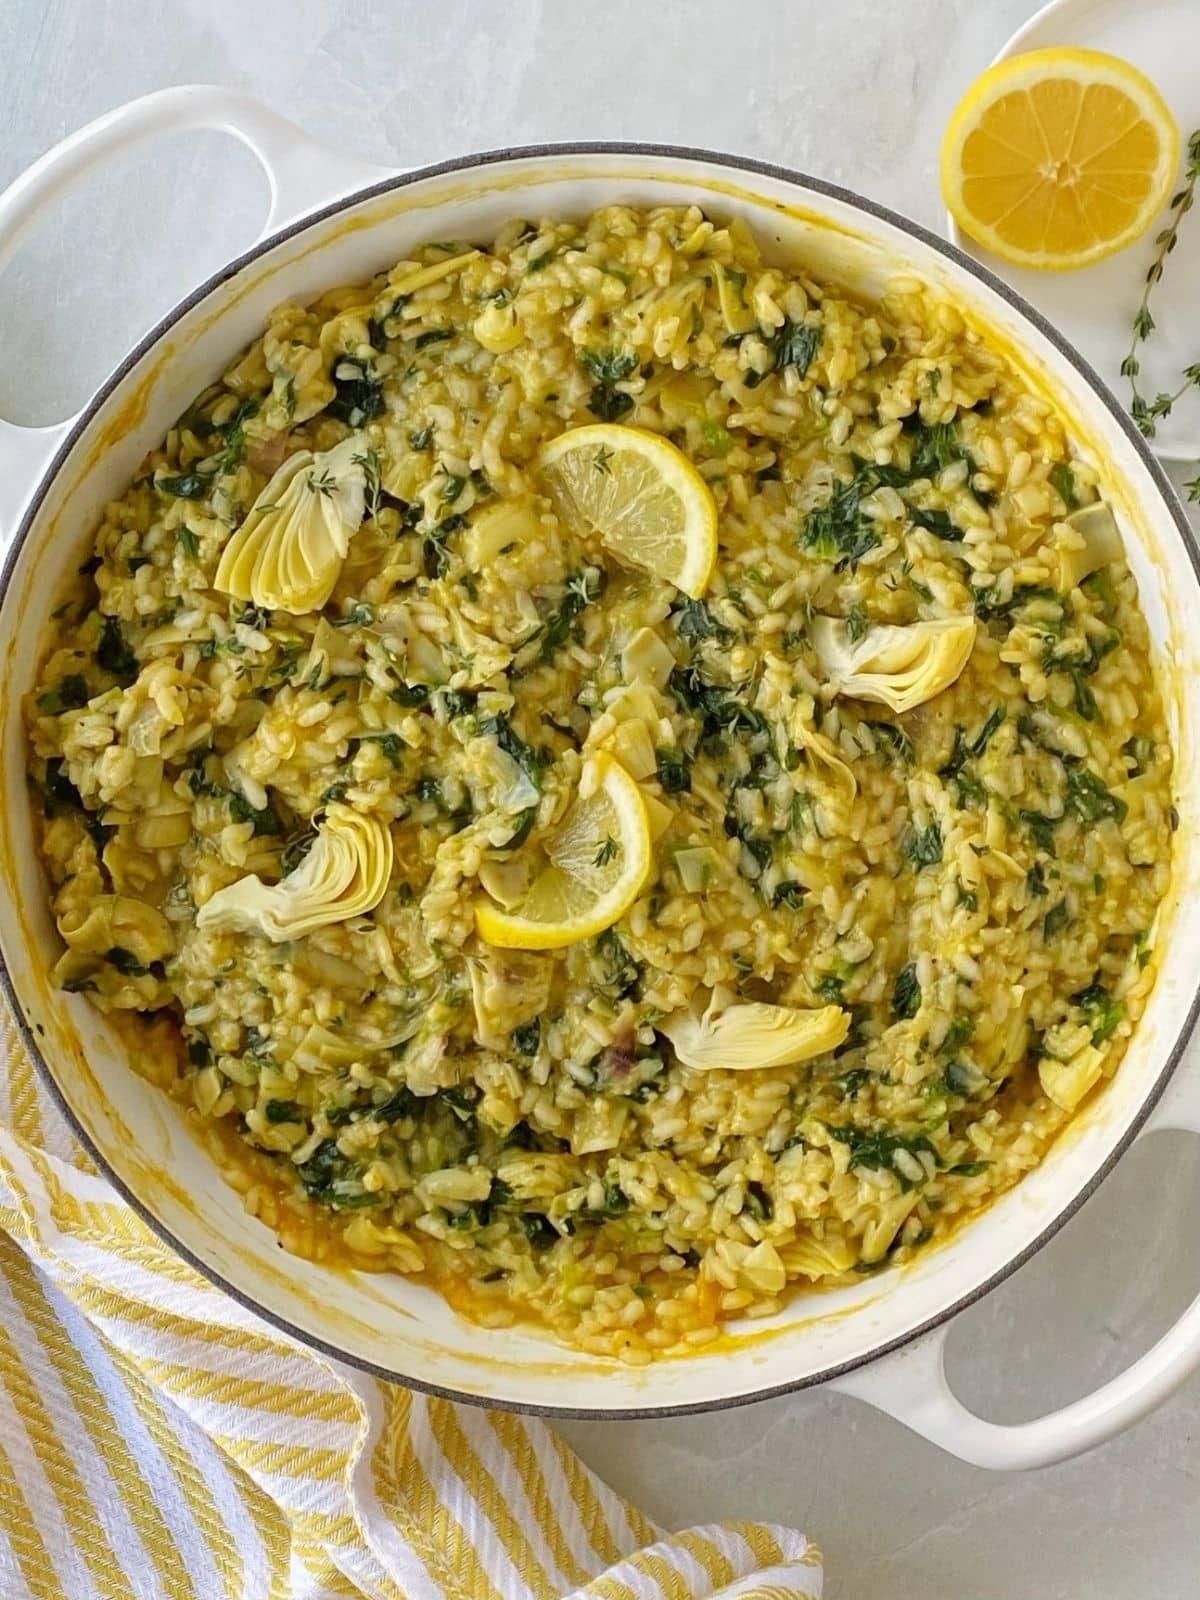 skillet of spinach artichoke risotto garnished with lemon.